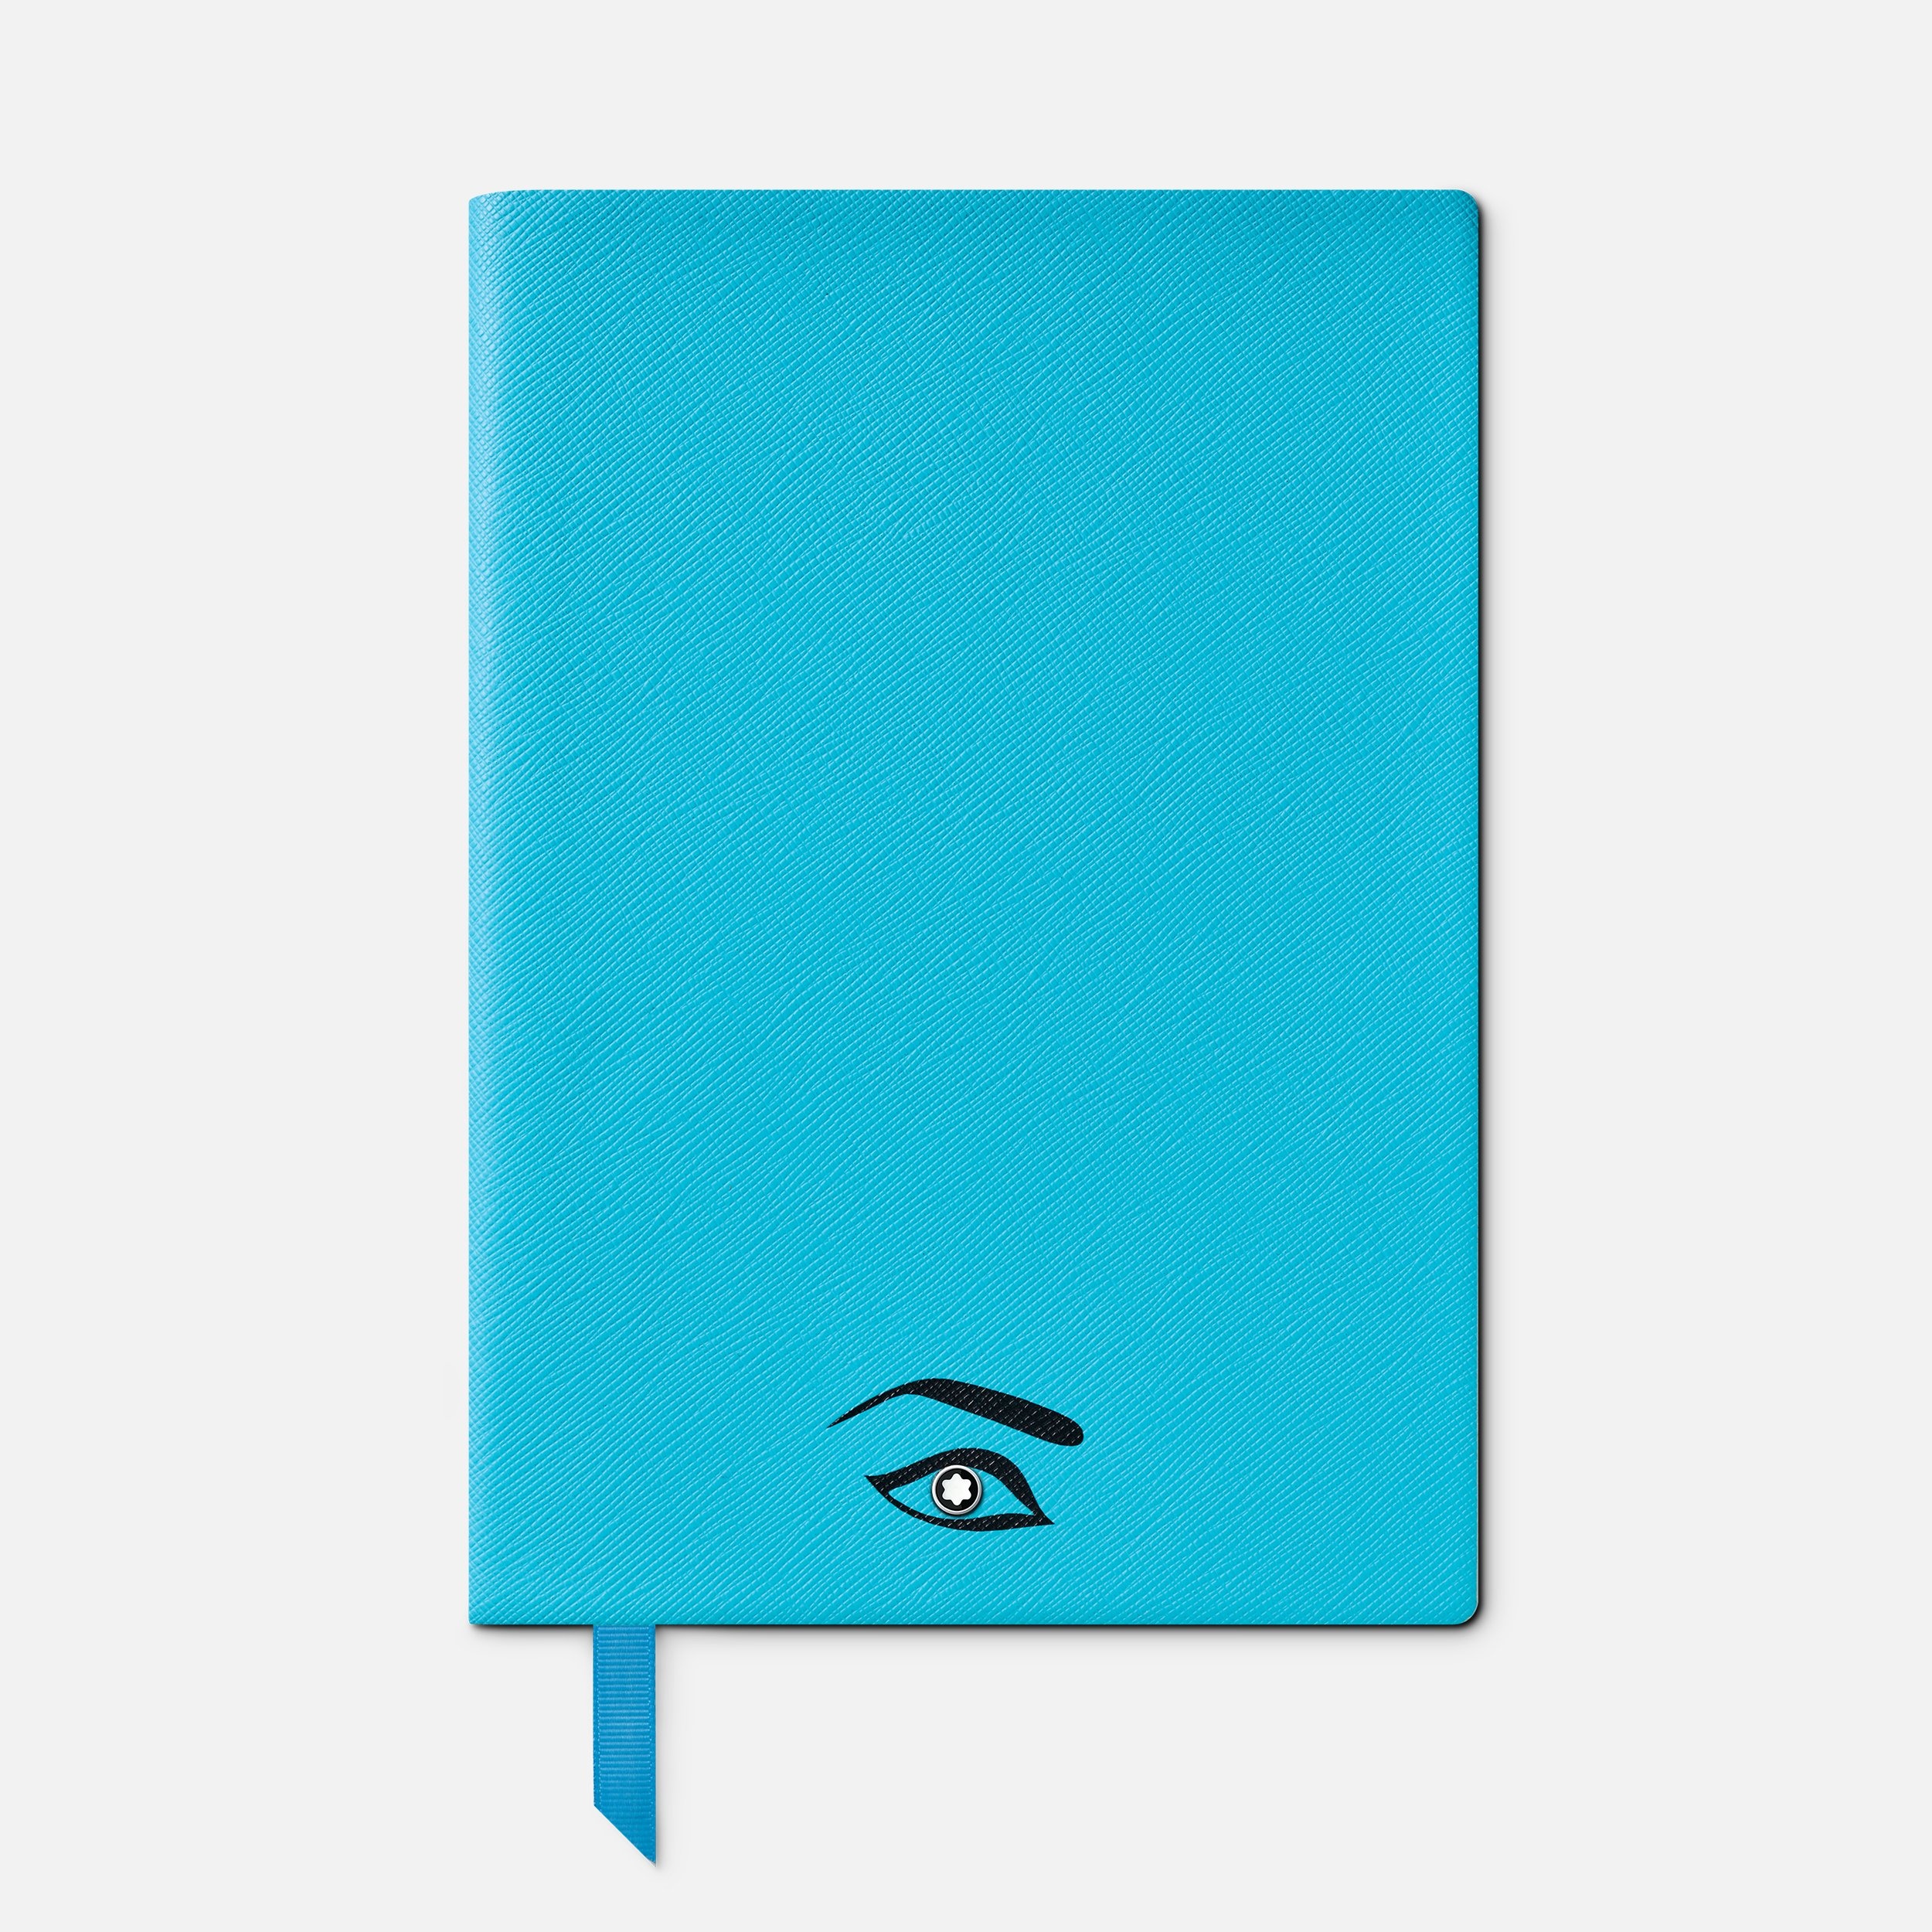 Notebook #146 small, Muses Maria Callas, blue lined - 1